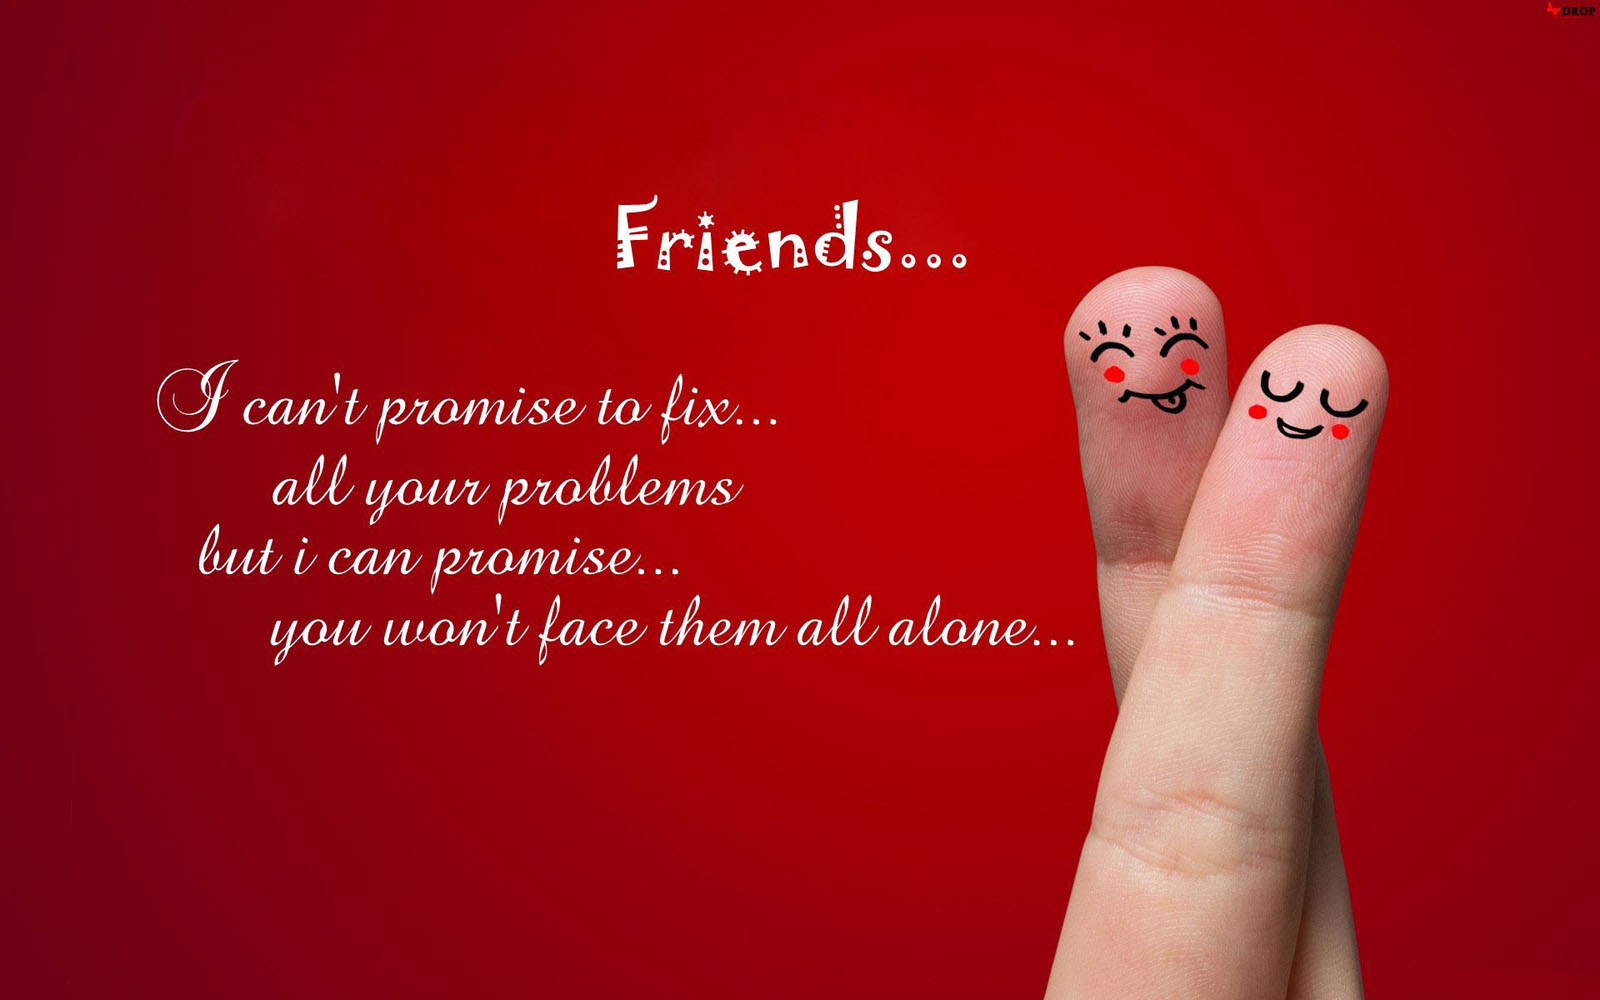 20 Creative Friendship Day Quotes and Wallpapers 20191